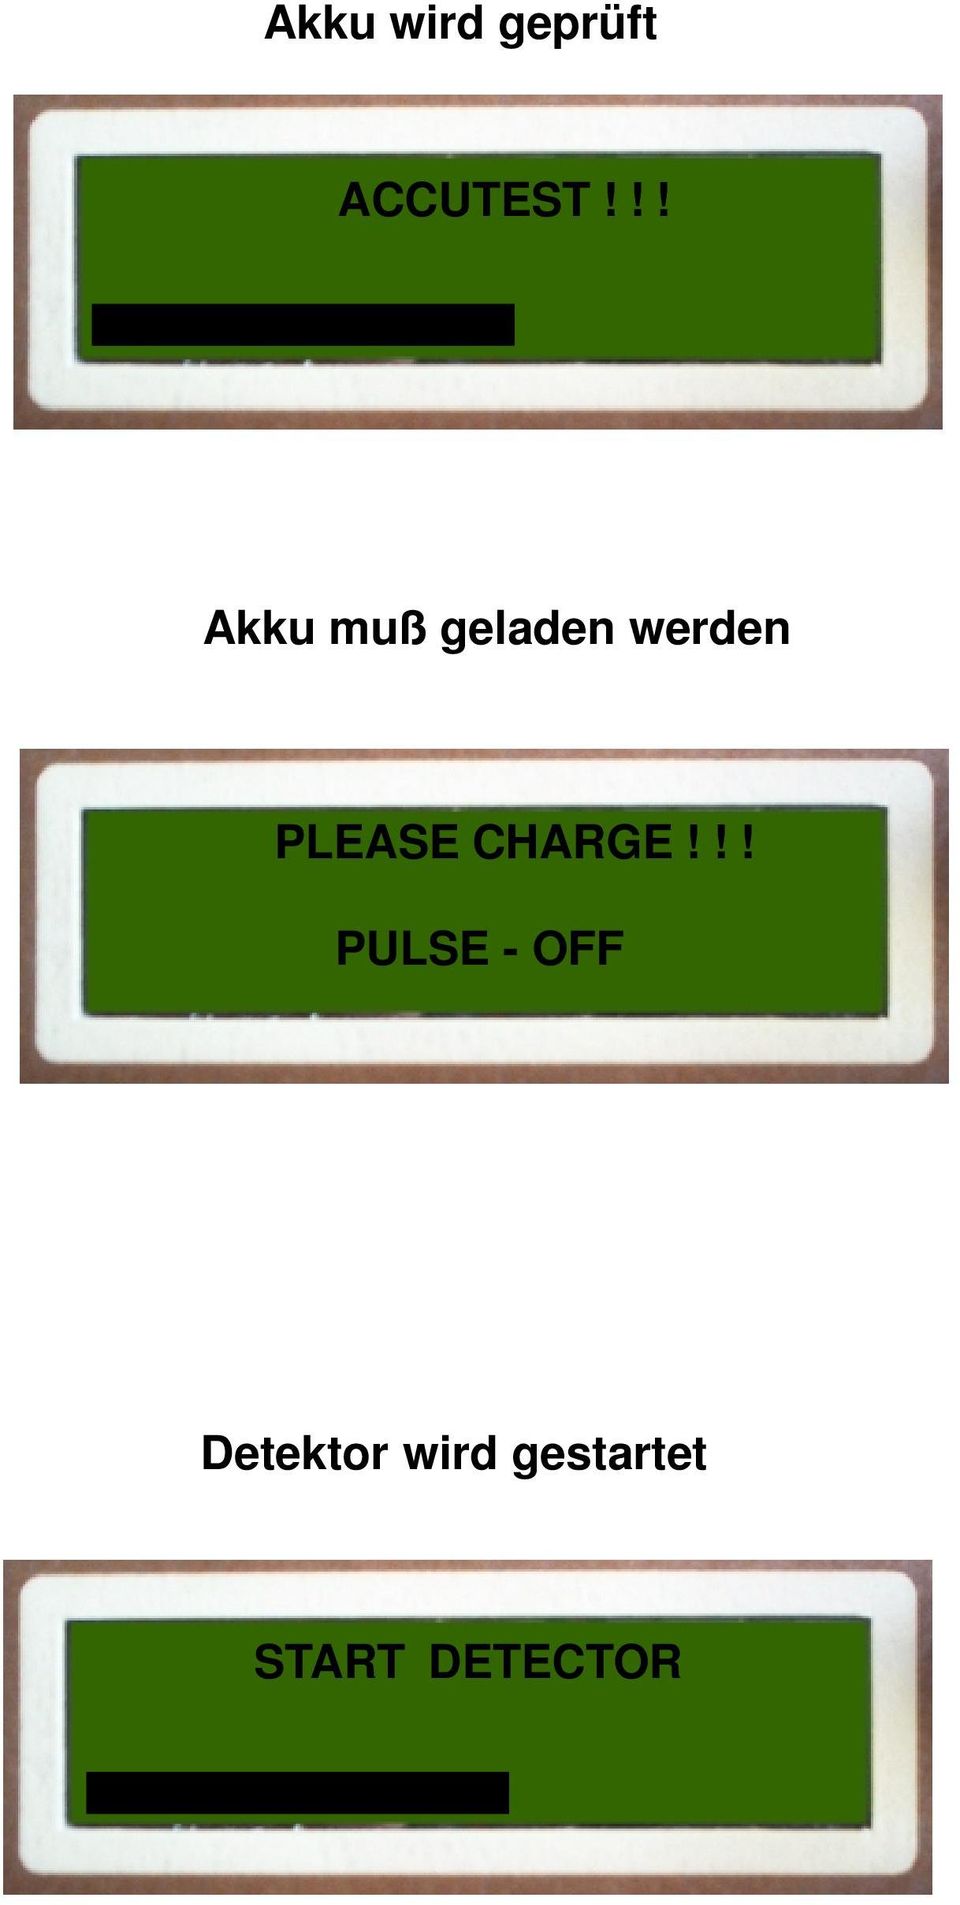 PLEASE CHARGE!